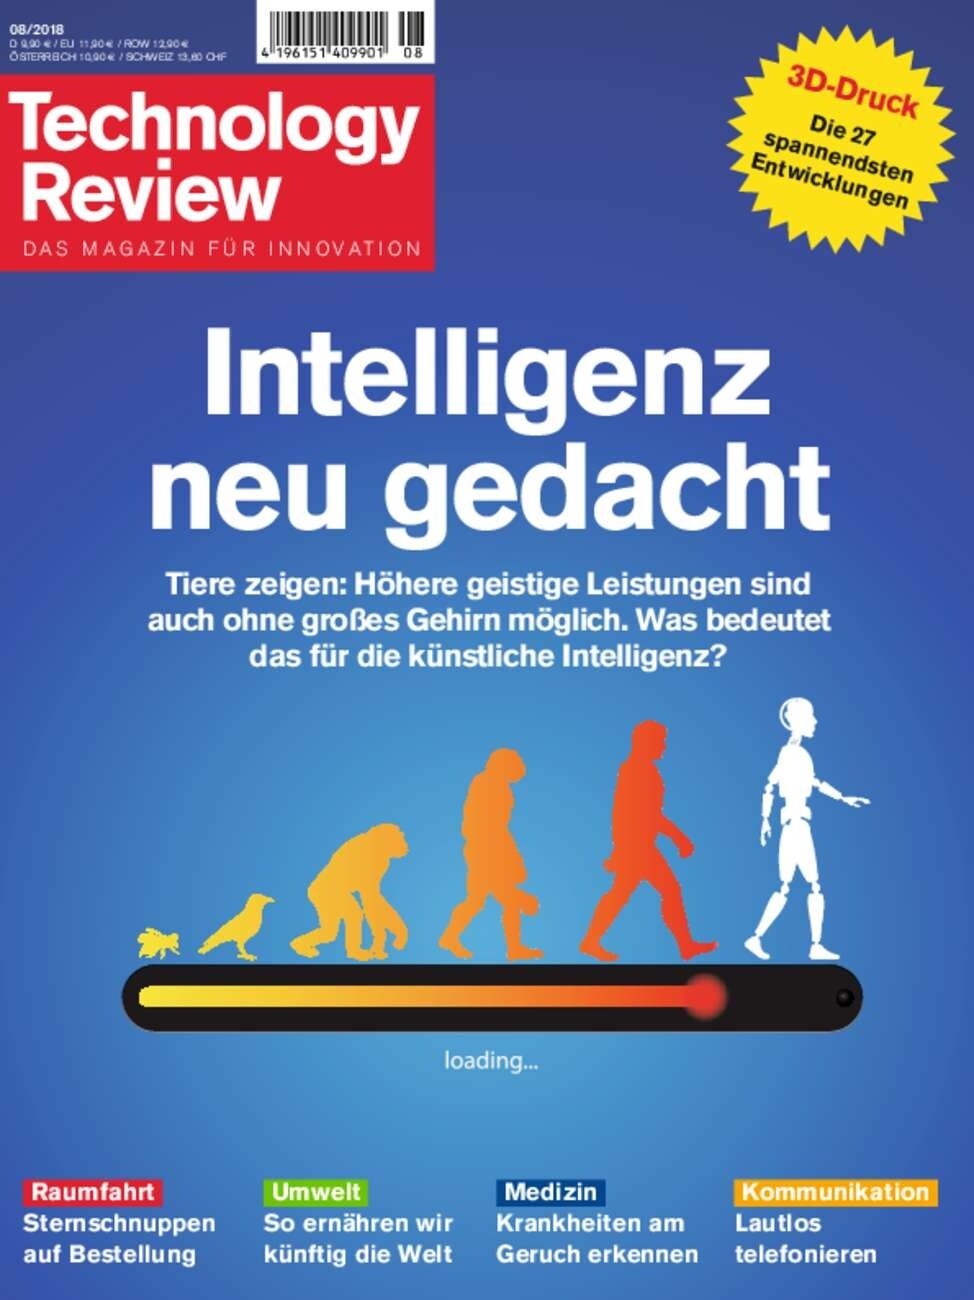 Technology Review 8/2018